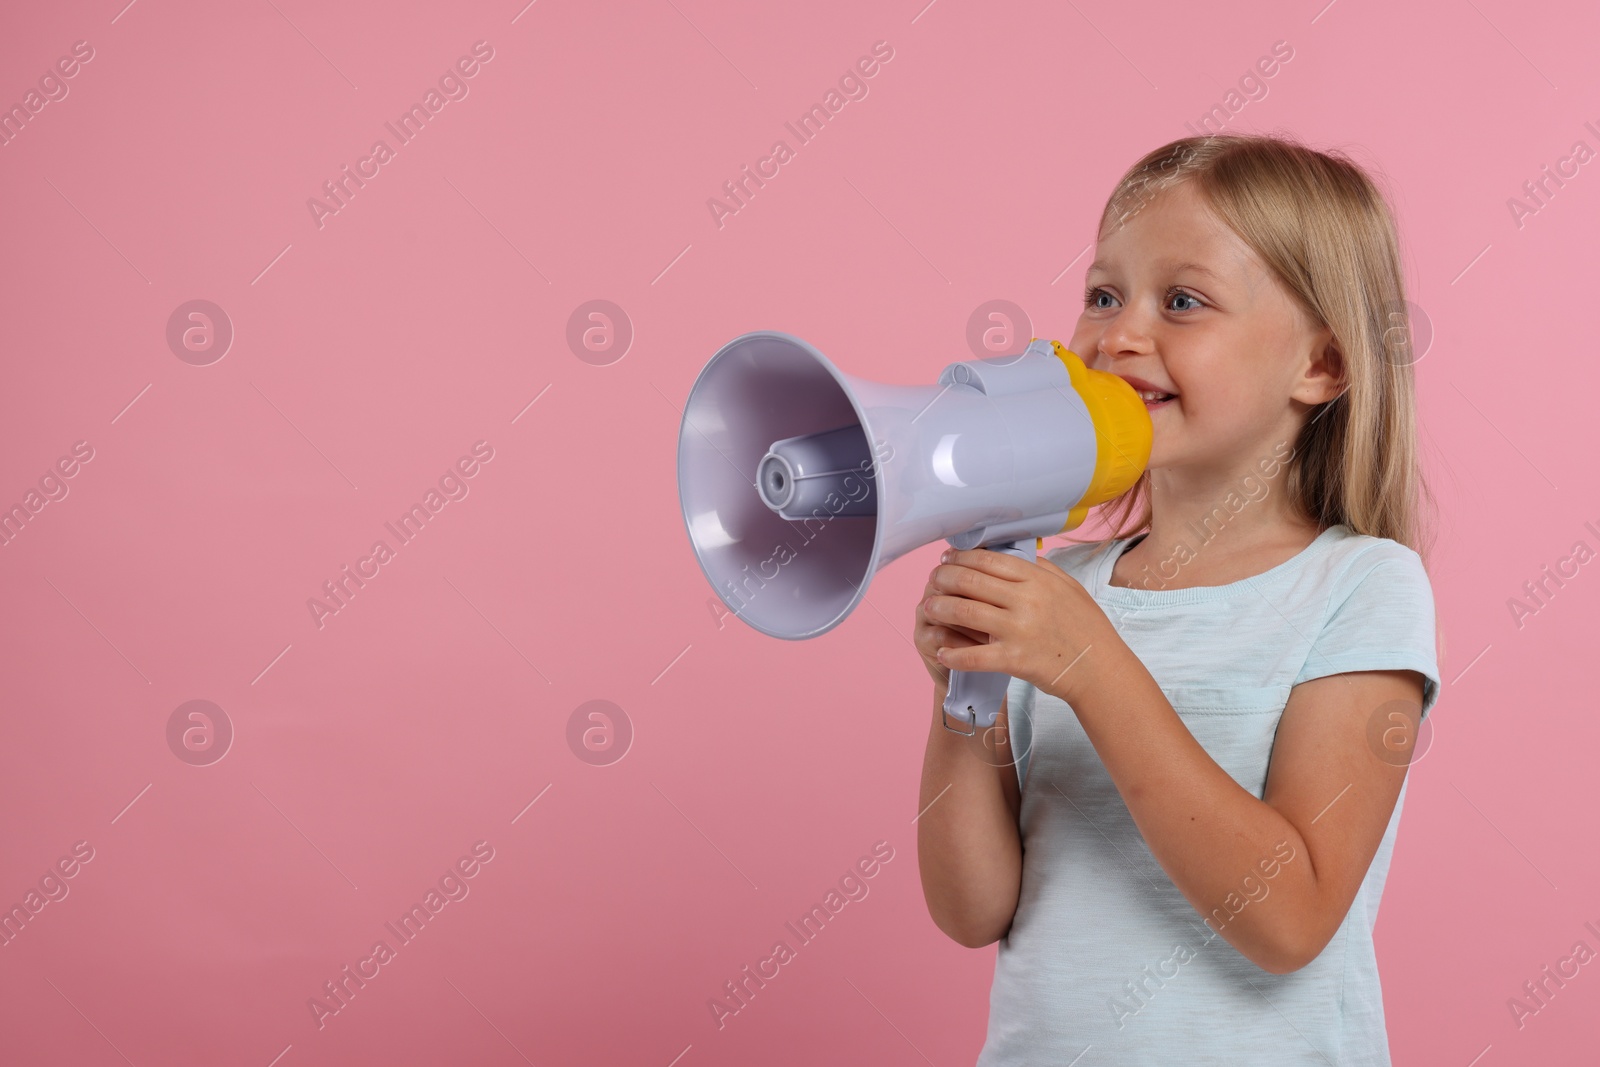 Photo of Special promotion. Little girl with megaphone on pink background. Space for text